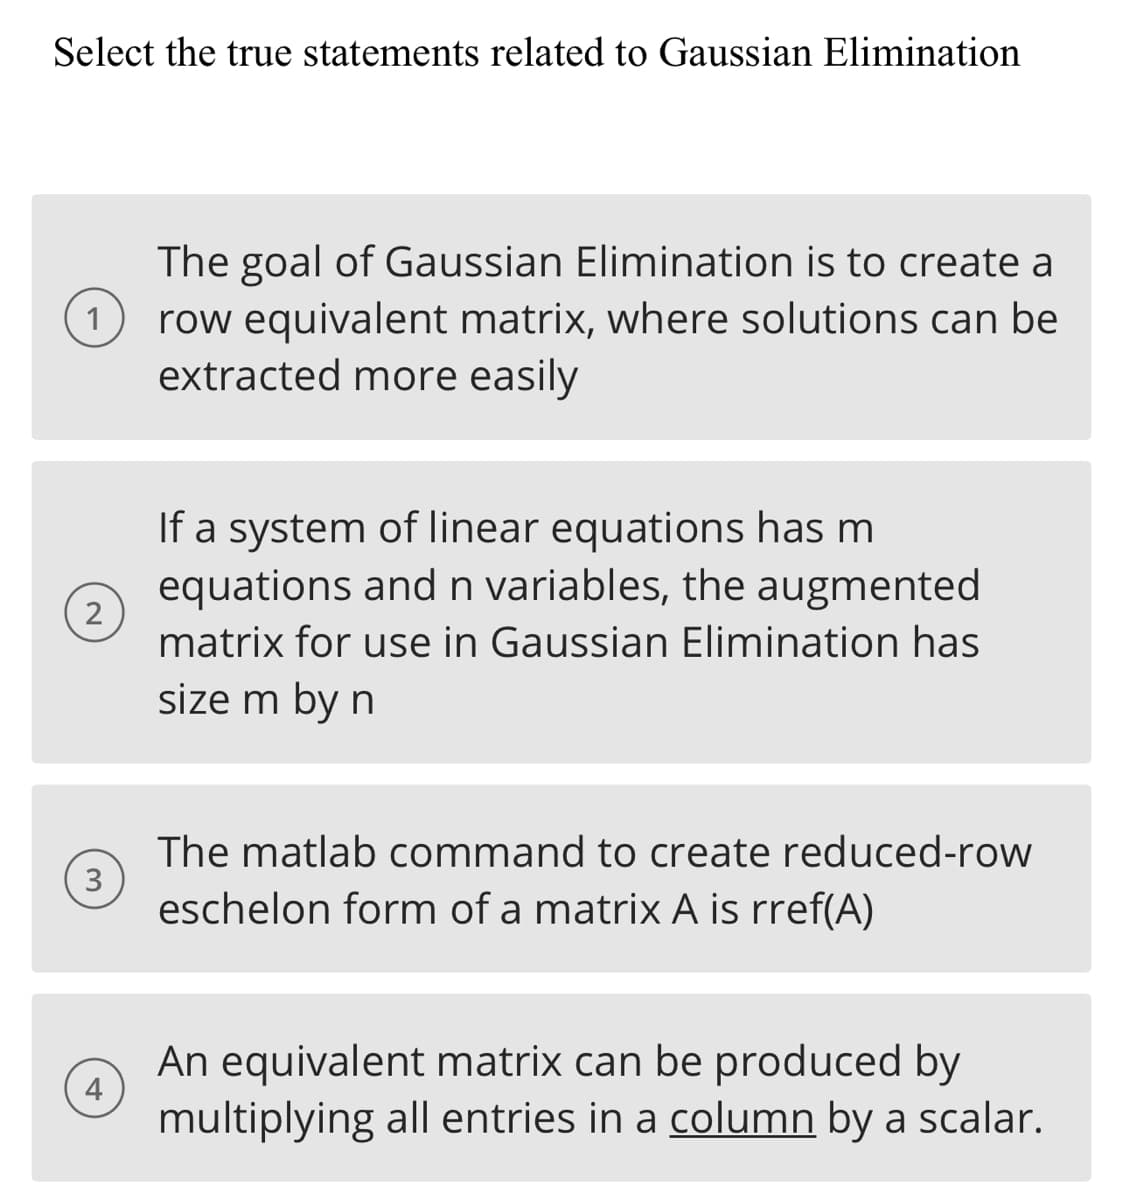 Select the true statements related to Gaussian Elimination
1
2
3
4
The goal of Gaussian Elimination is to create a
row equivalent matrix, where solutions can be
extracted more easily
If a system of linear equations has m
equations and n variables, the augmented
matrix for use in Gaussian Elimination has
size m by n
The matlab command to create reduced-row
eschelon form of a matrix A is rref(A)
An equivalent matrix can be produced by
multiplying all entries in a column by a scalar.